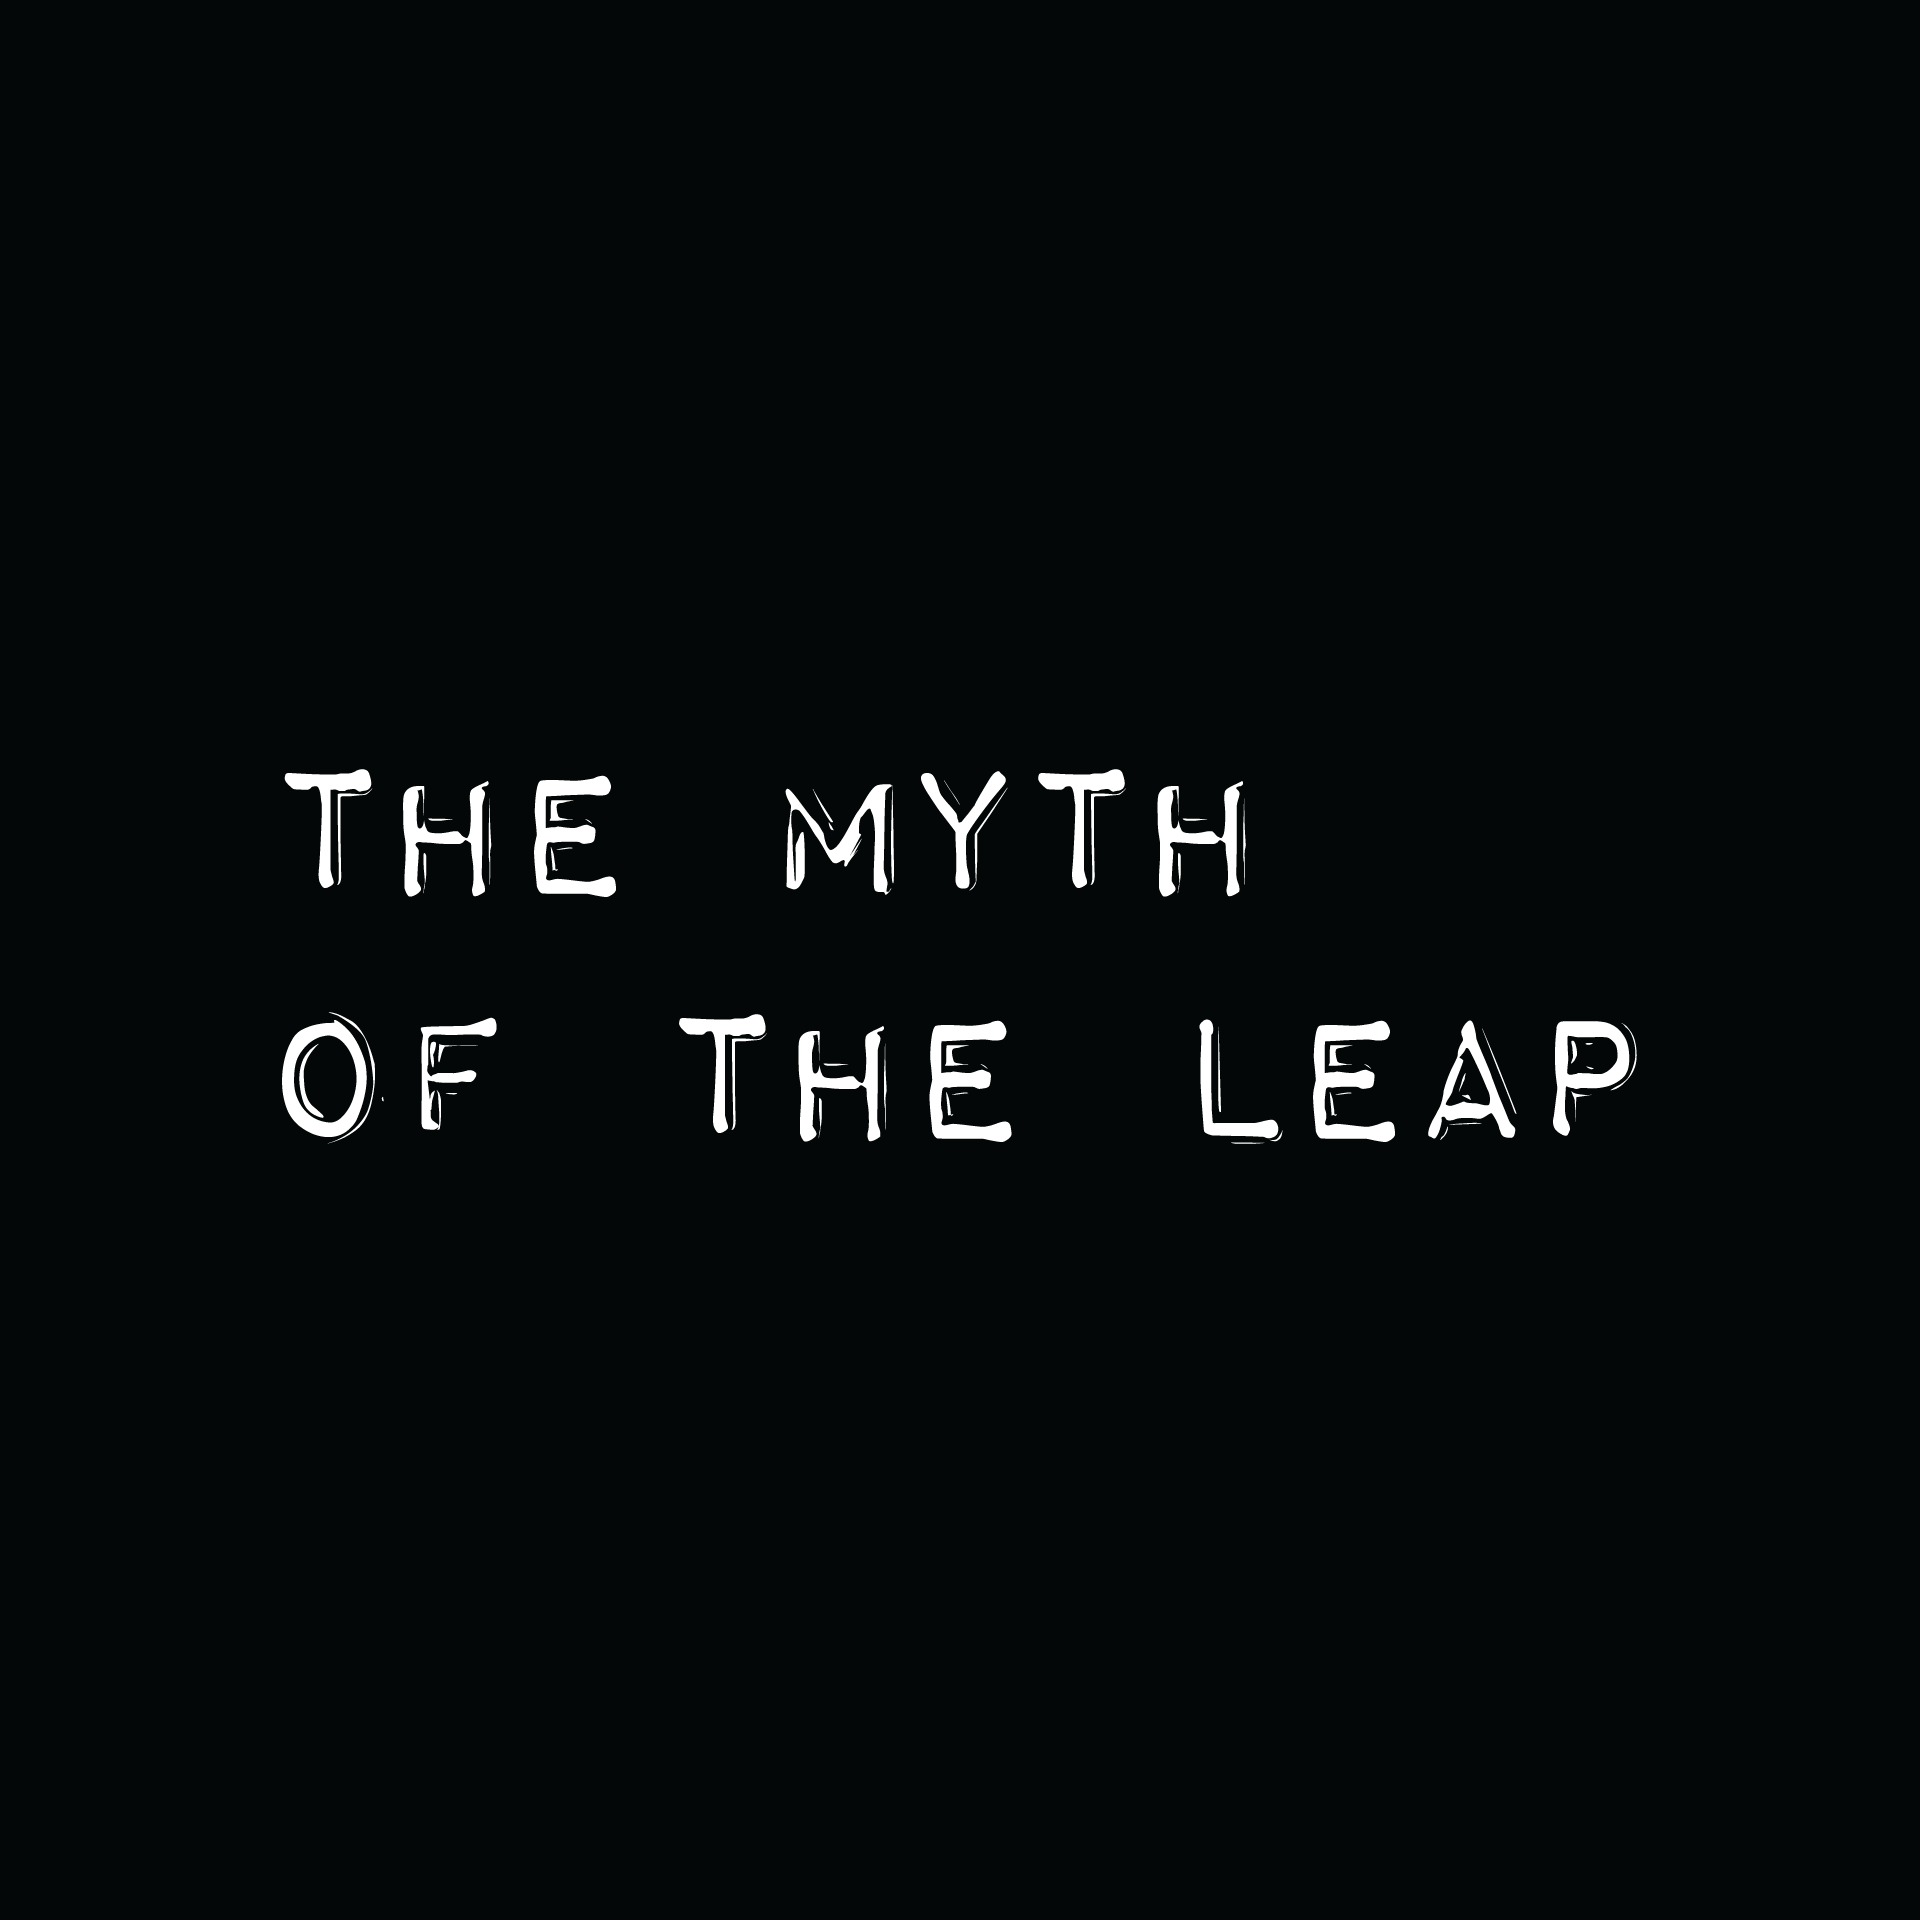 Starting a business - the myth of the leap